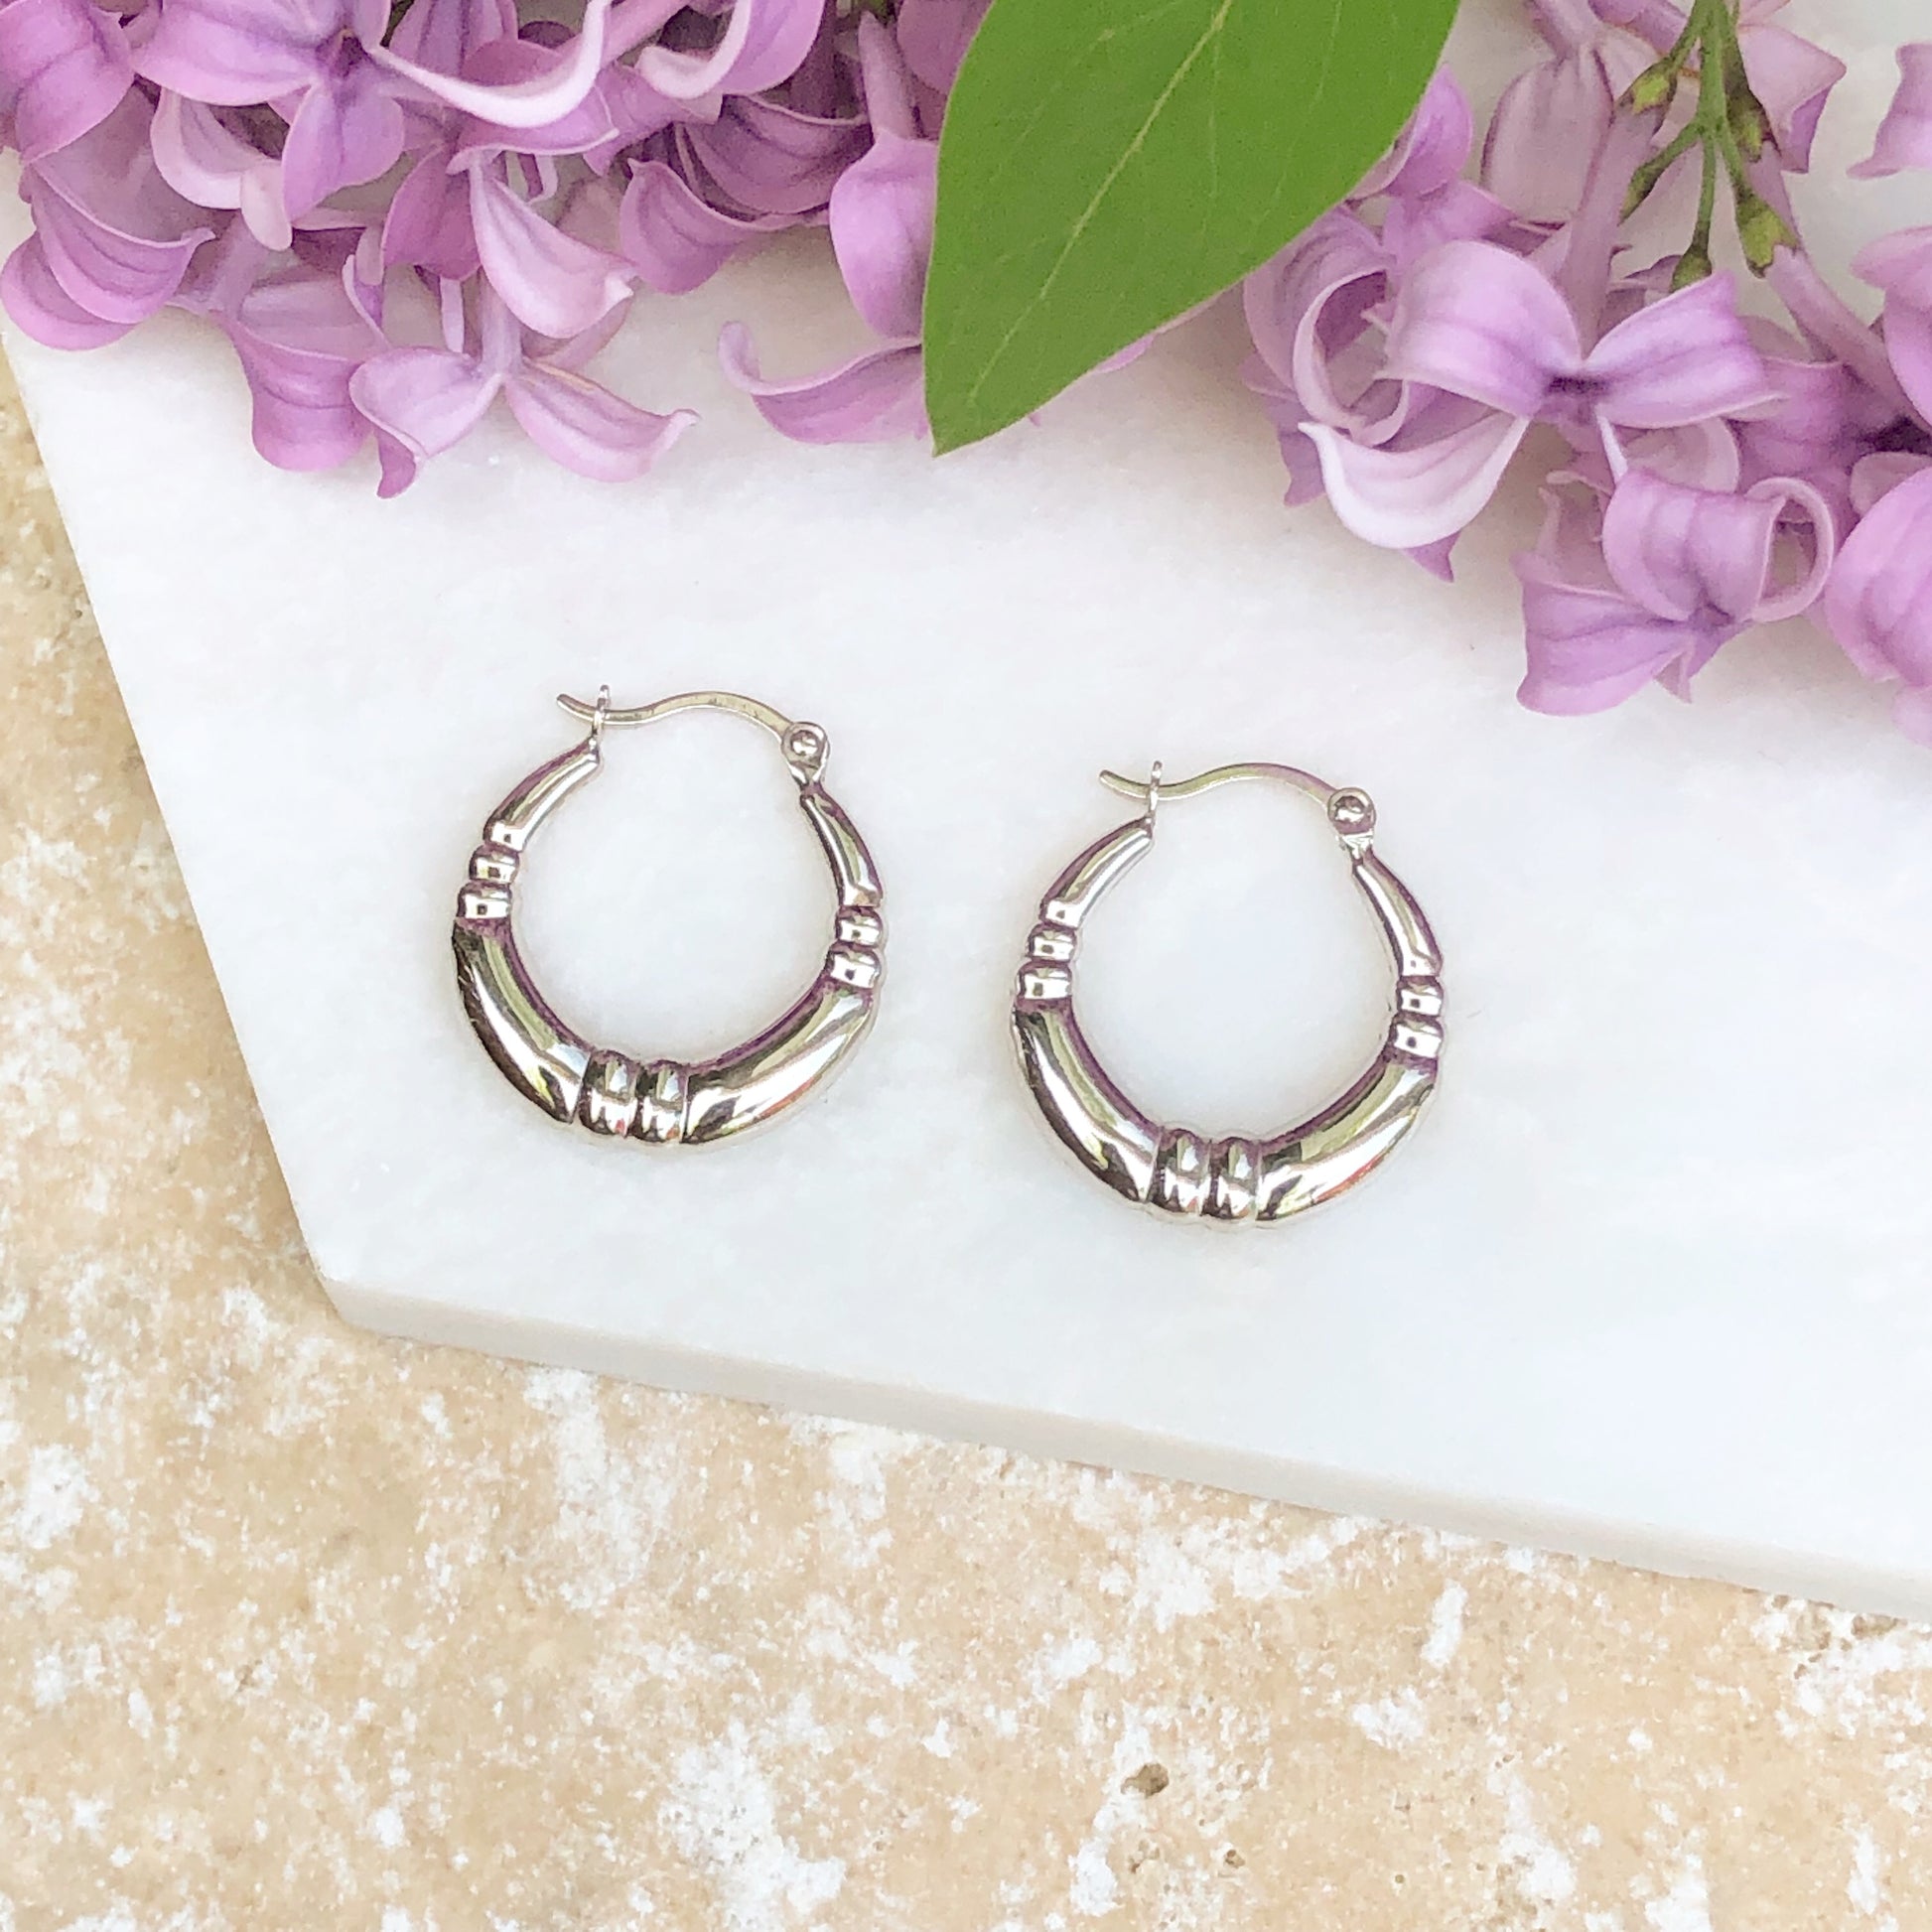 10KT White Gold Scalloped Small Hoop Earrings, 10KT White Gold Scalloped Small Hoop Earrings - Legacy Saint Jewelry